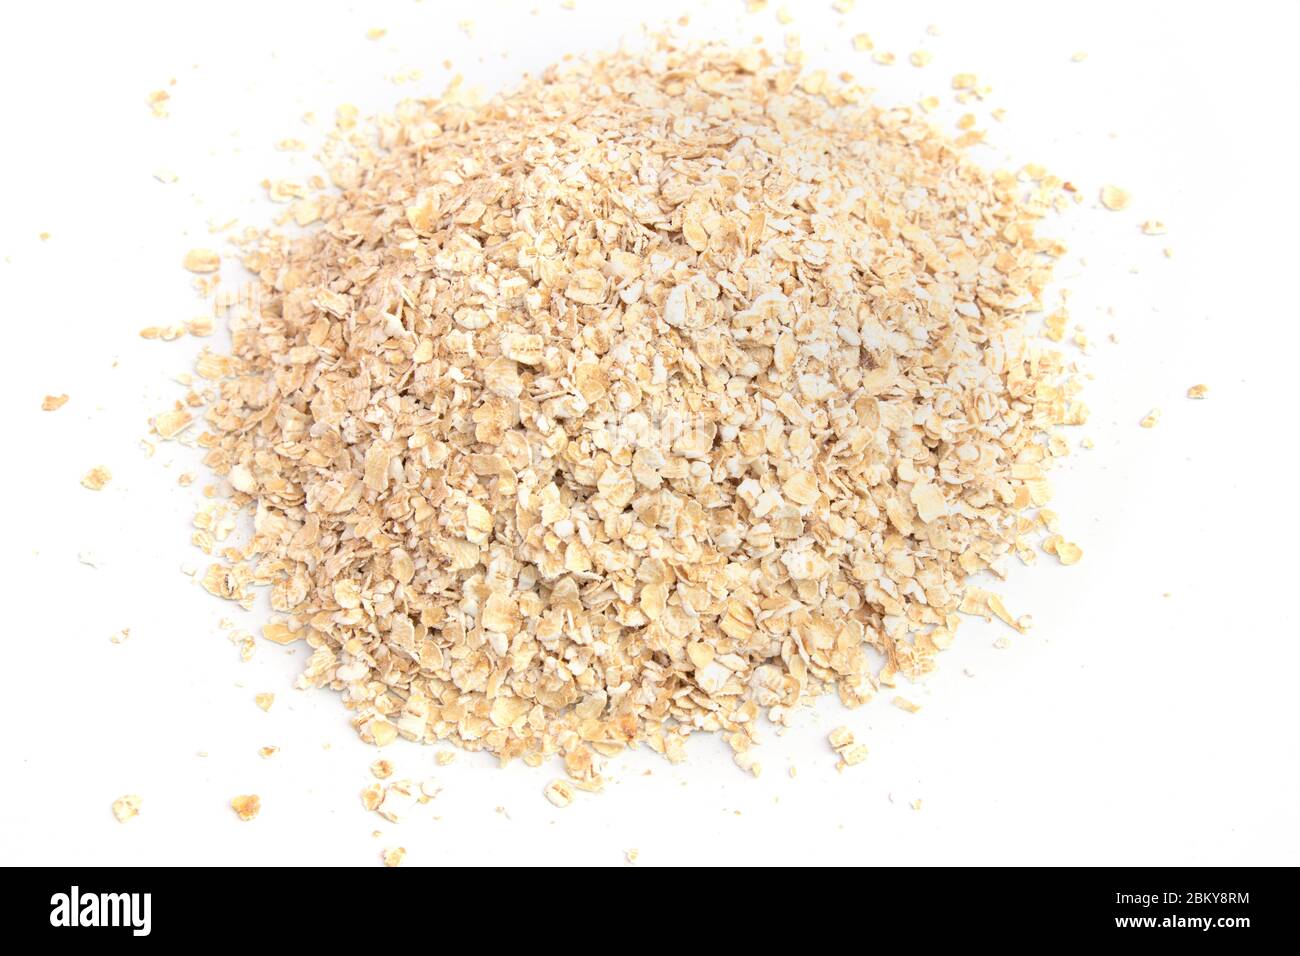 Whole oats isolated on a white background Stock Photo